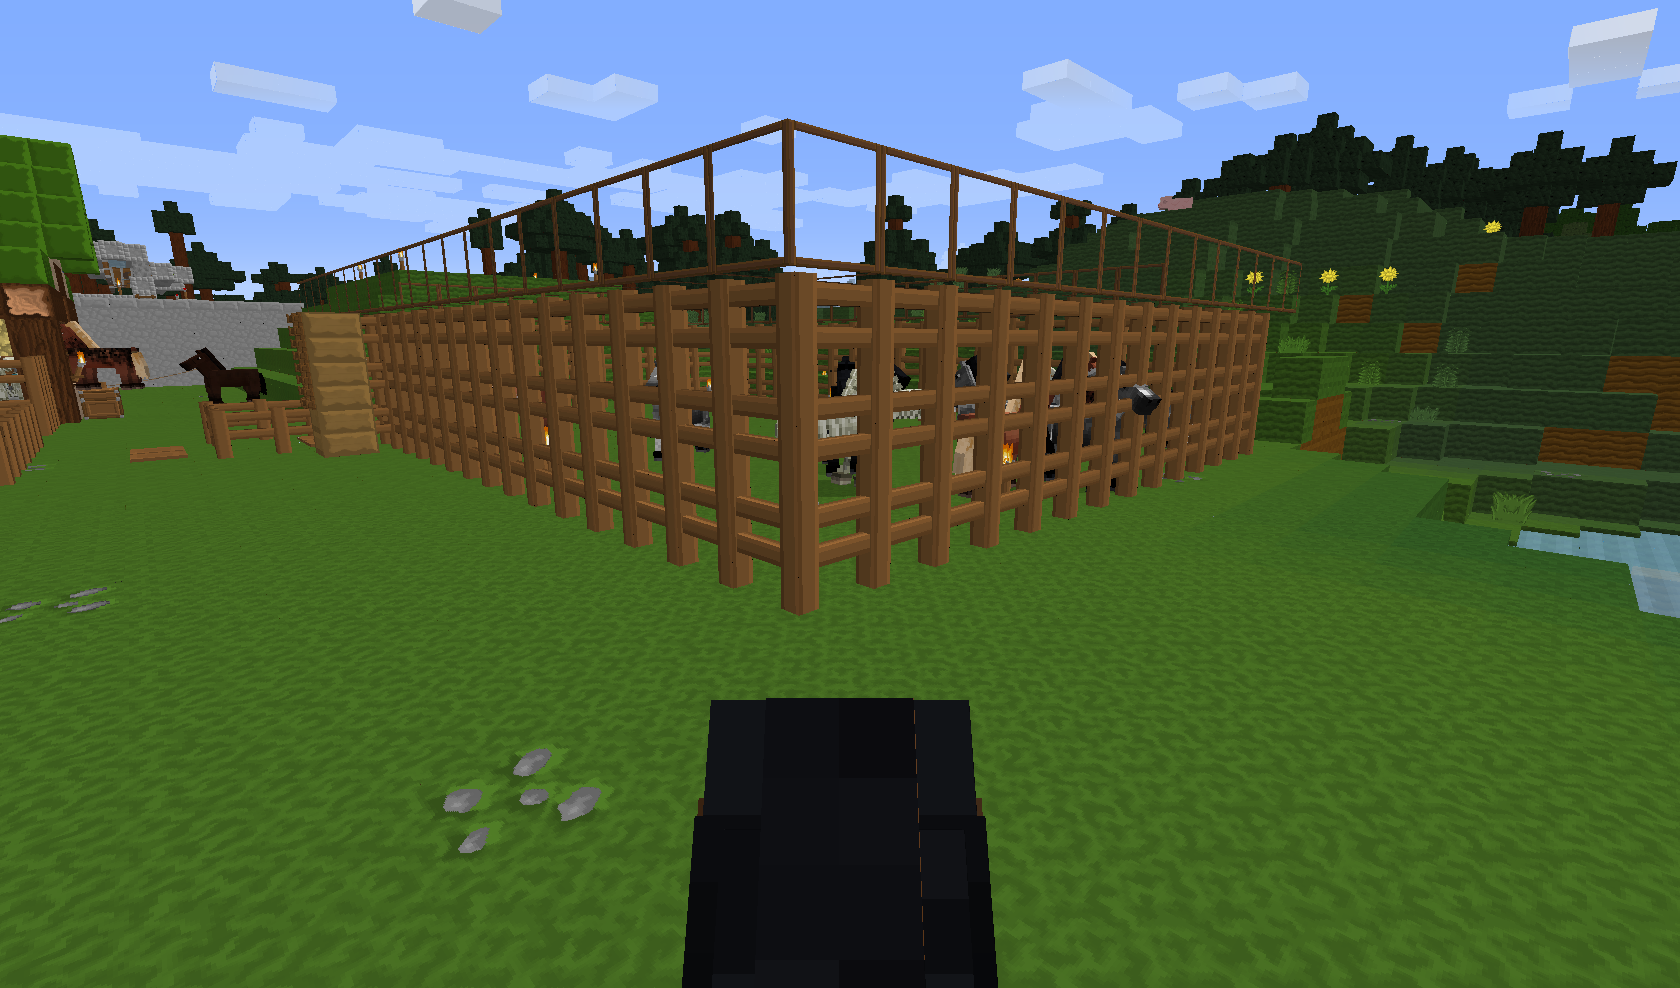 Horses keep escaping my fence. : Minecraft